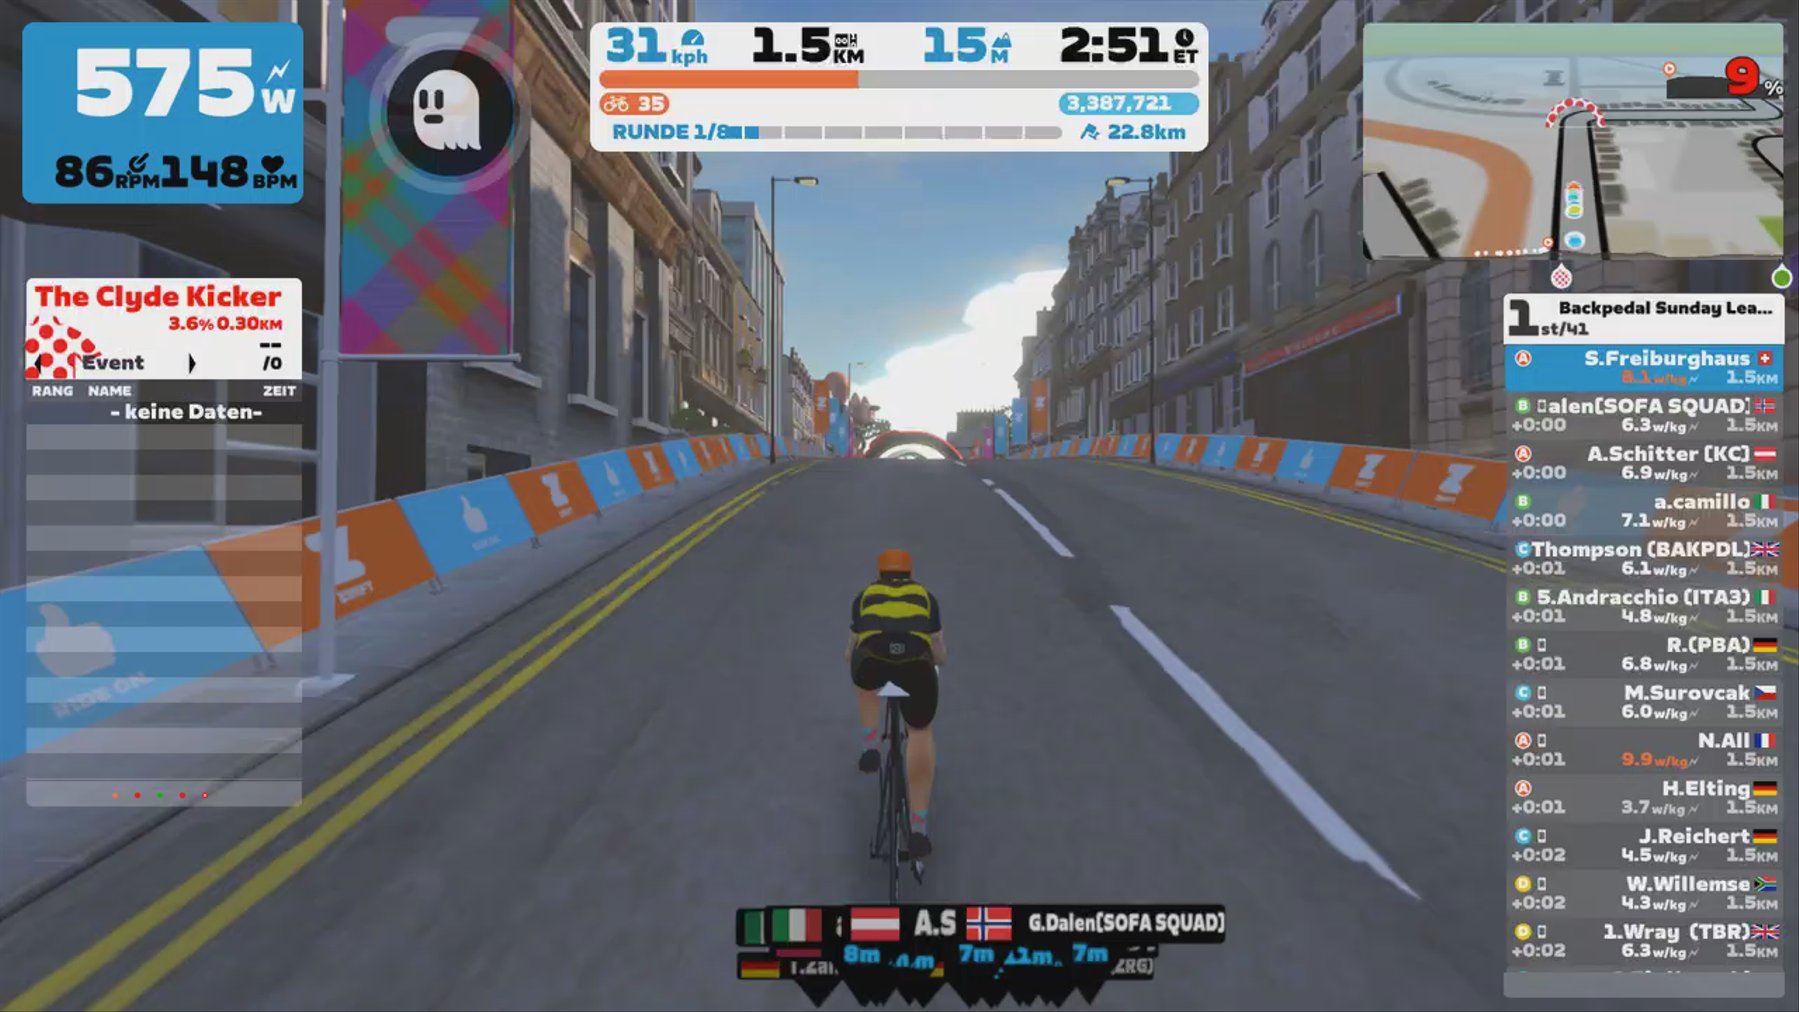 Zwift - Race: Backpedal Sunday League (A) on Glasgow Crit Circuit in Scotland